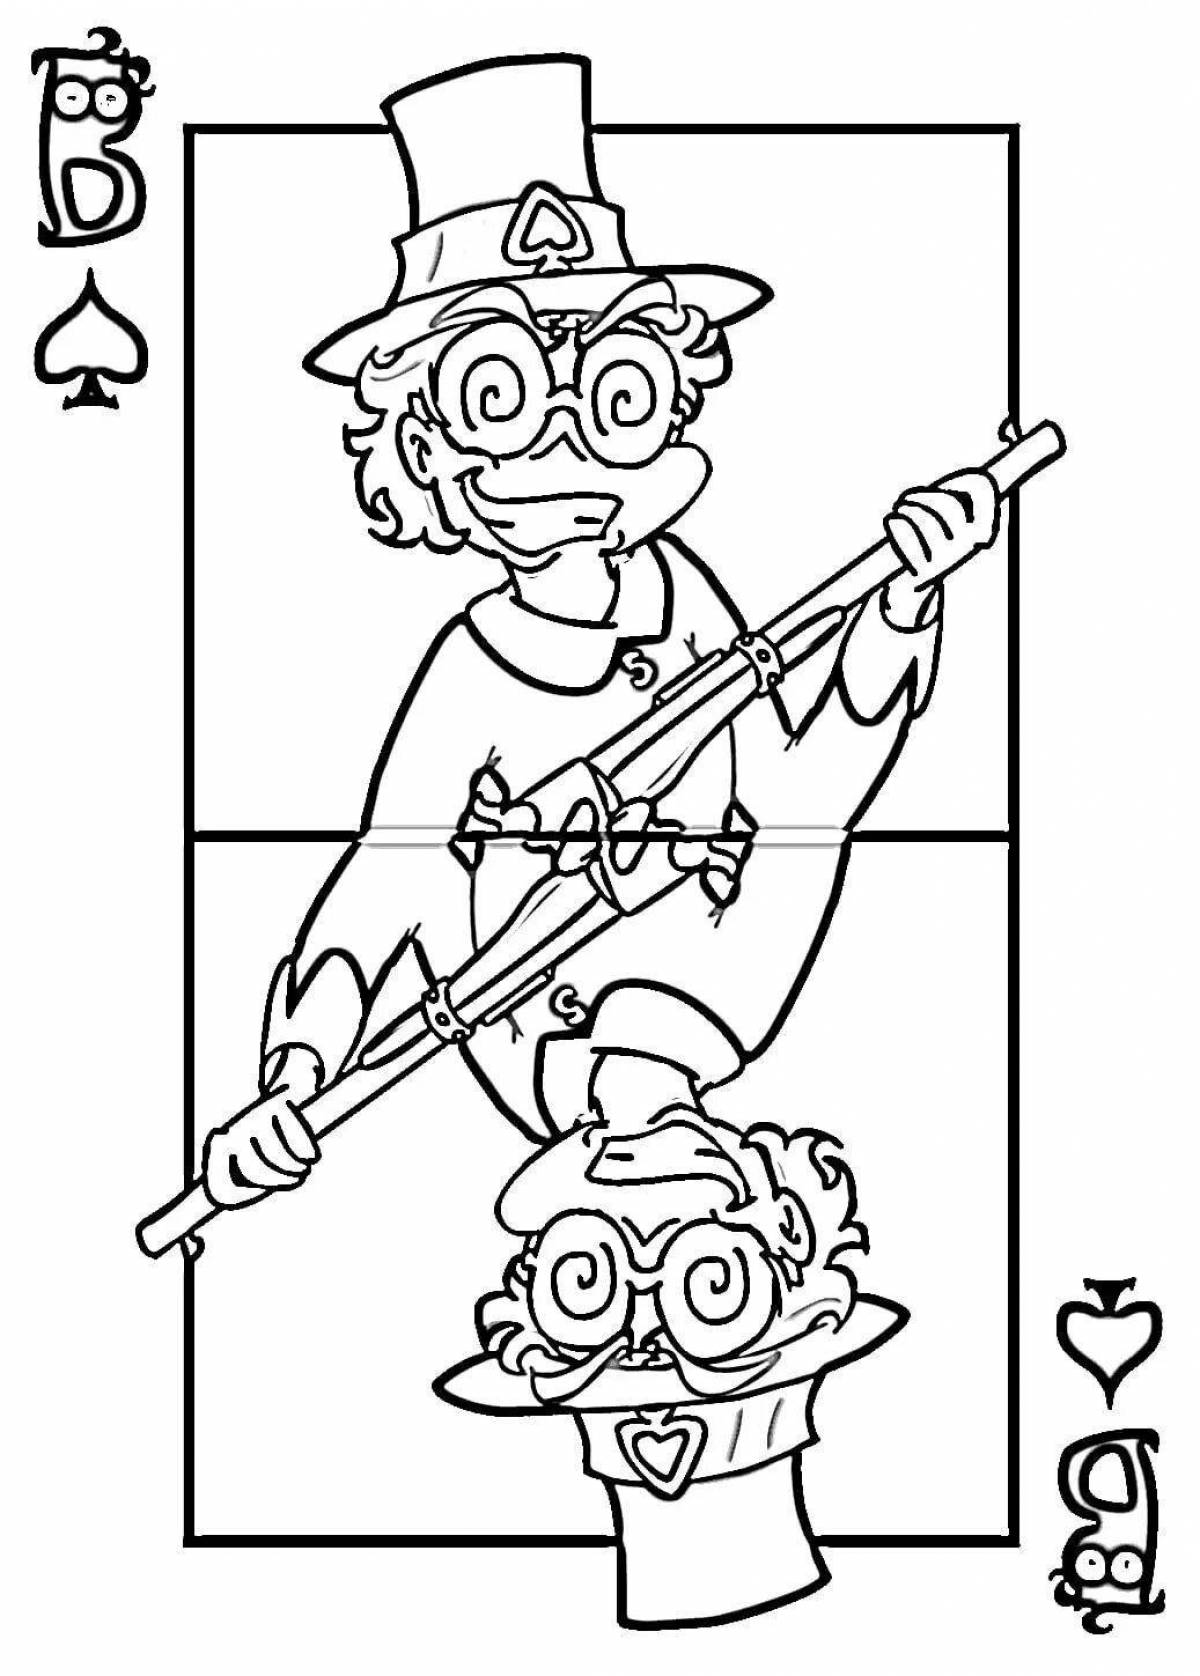 Coloring majestic king of spades 13 cards